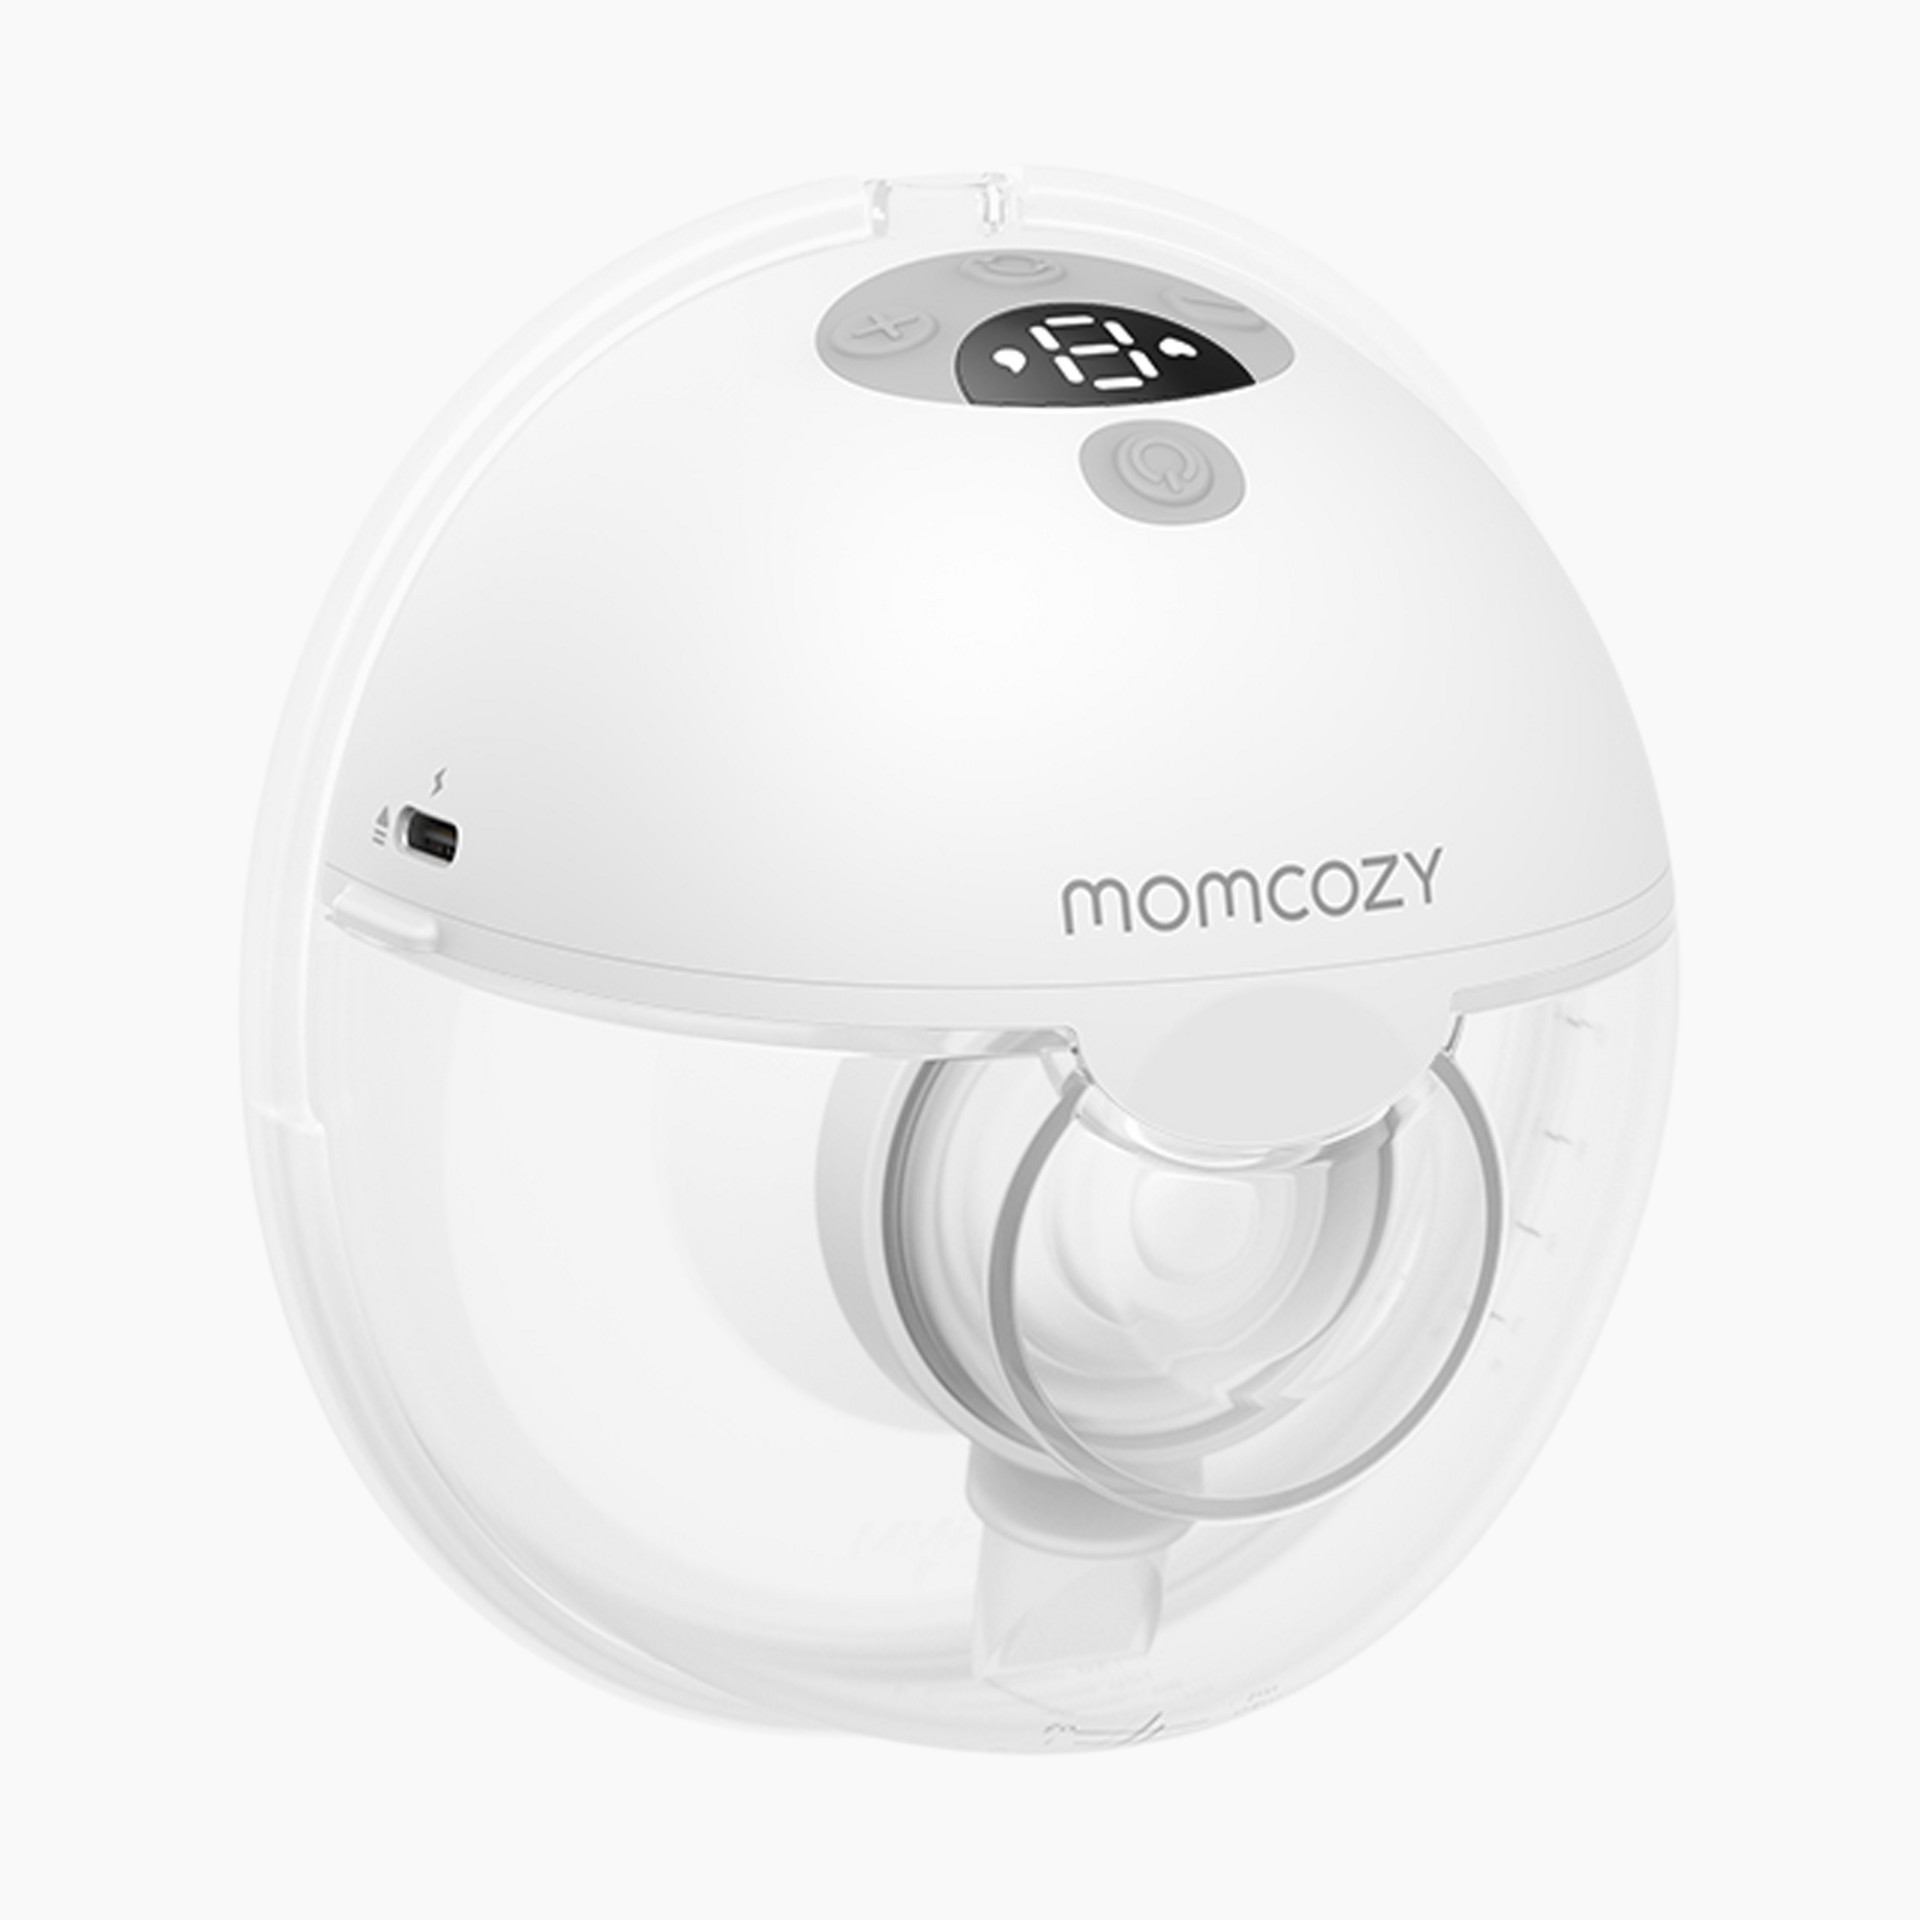 Momcozy 4-in-1 Pumping Bra Hands Free for Breast Pump S9, S12, Spectra,  Medela, Elvie, Willow